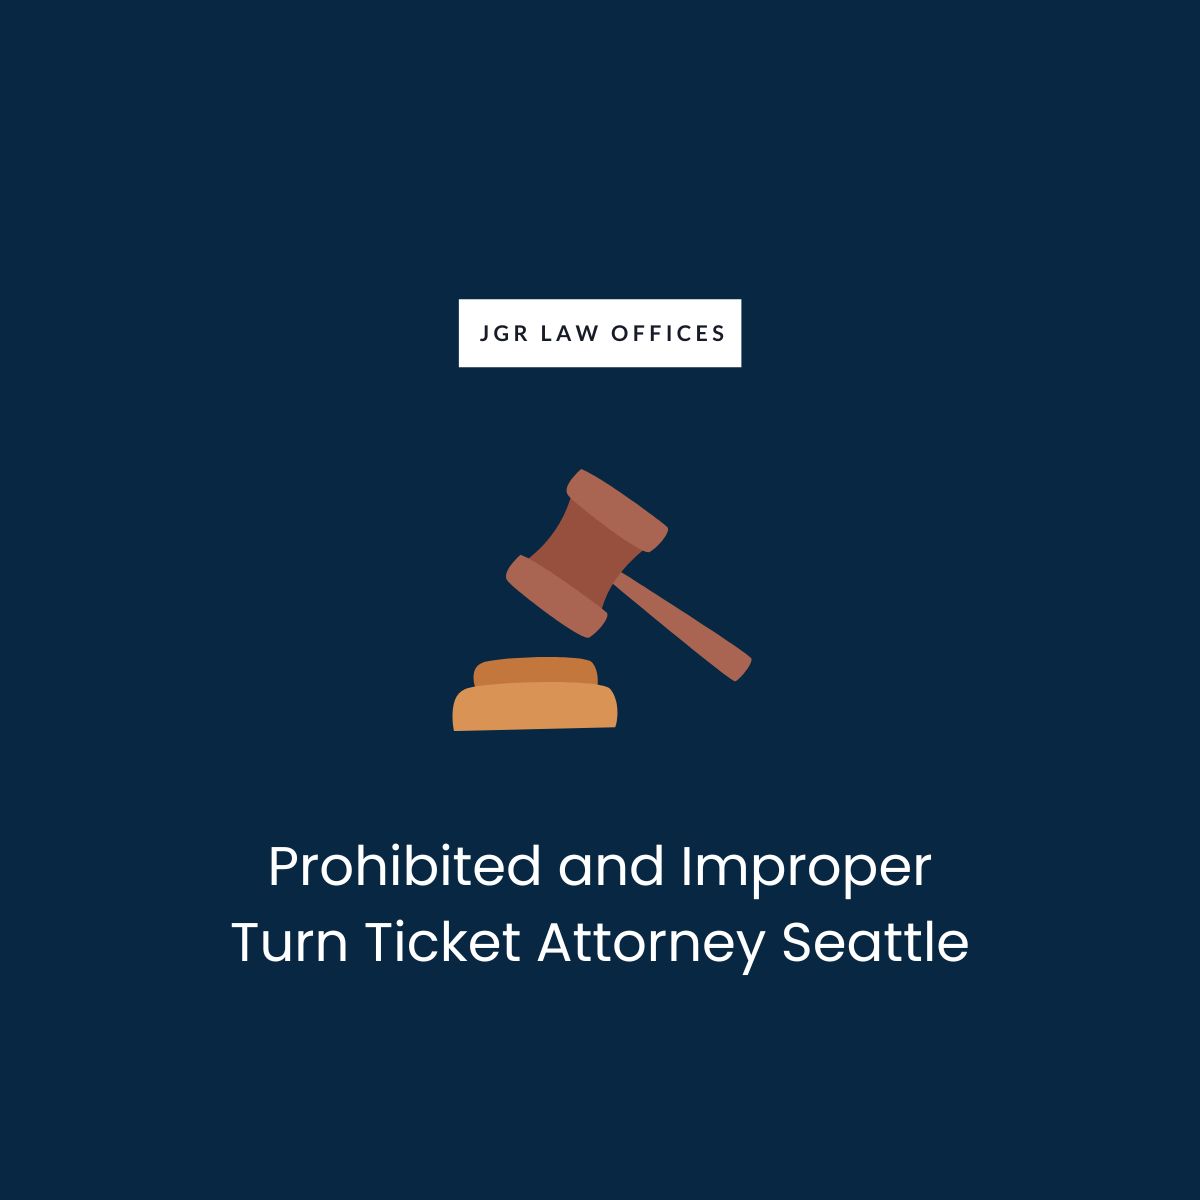 Prohibited and Improper Turn Ticket Attorney Seattle